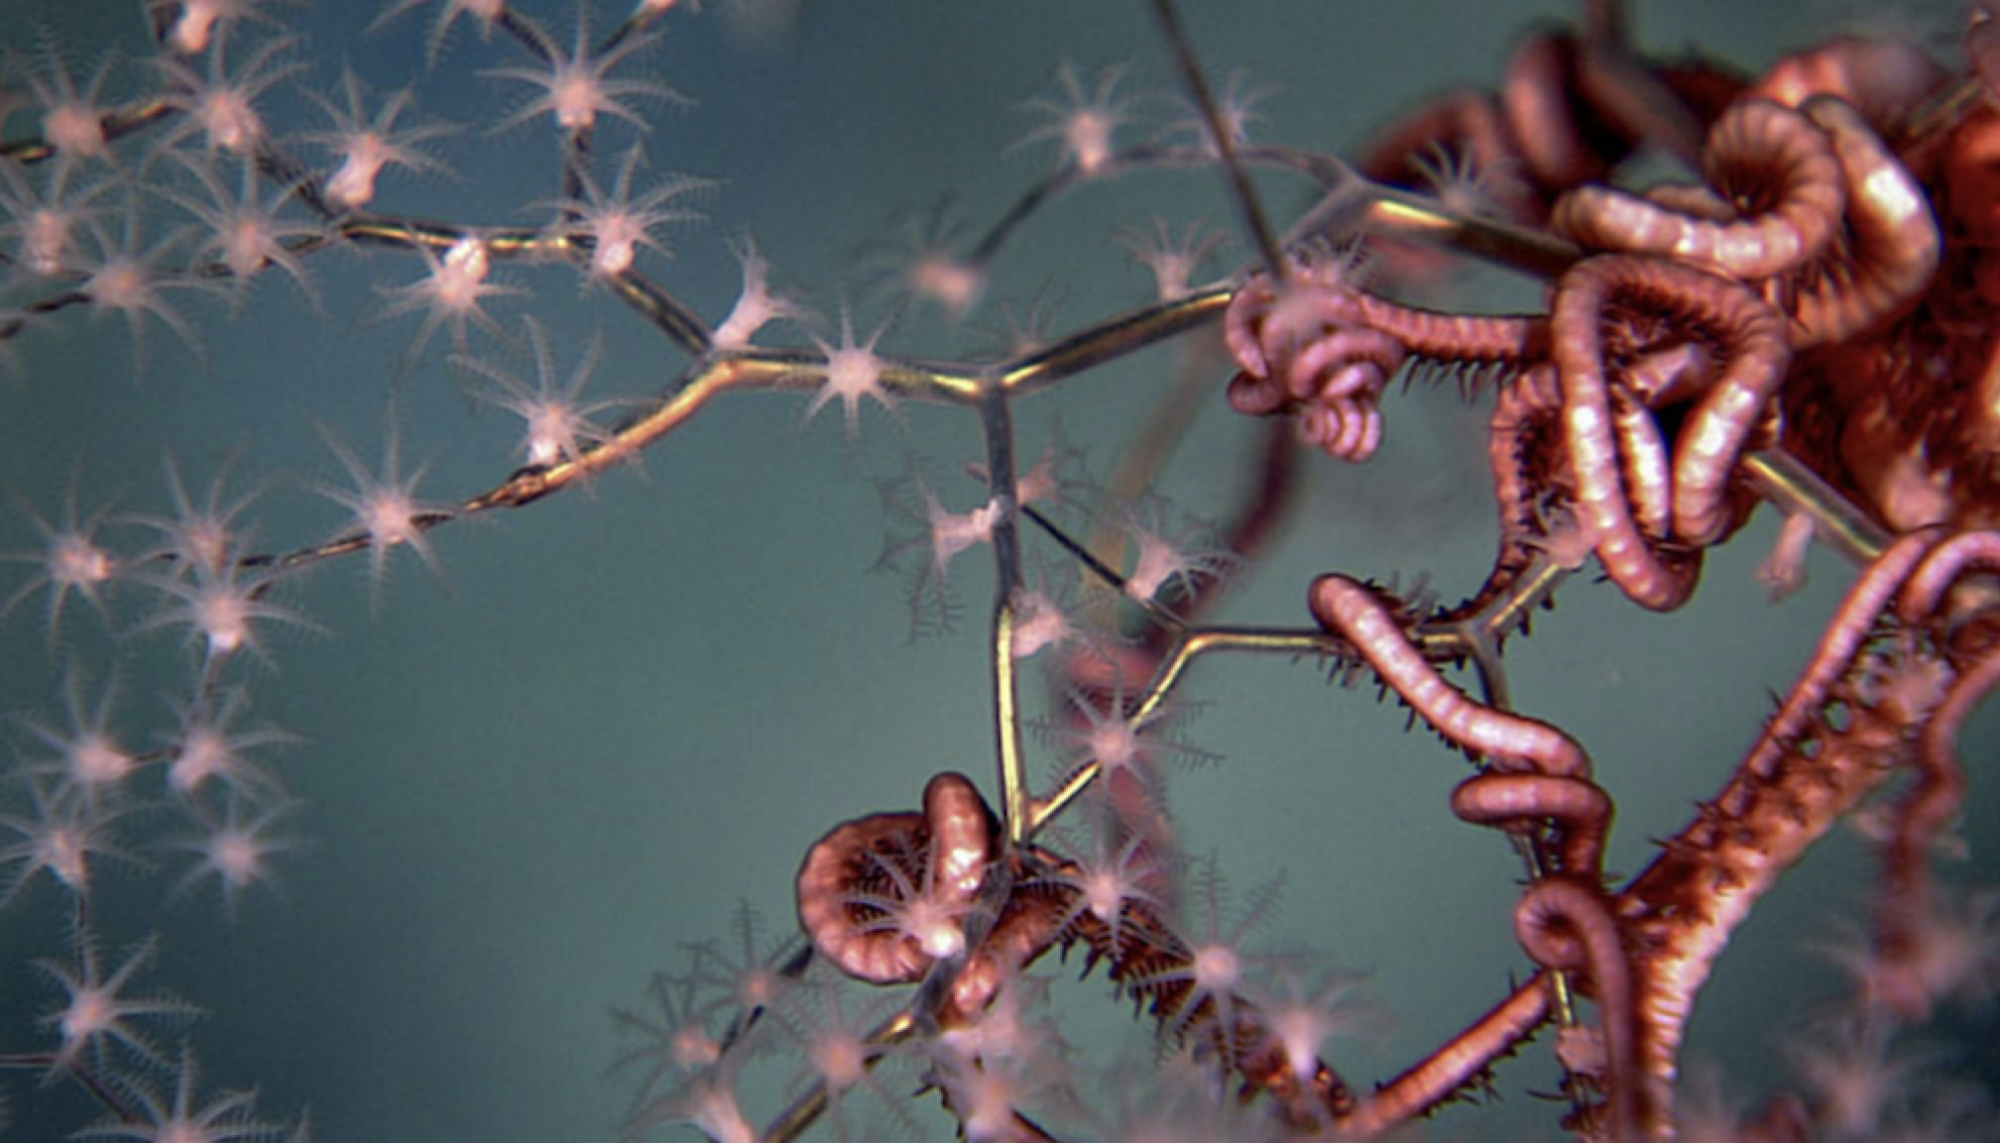 coral intertwined with a brittle star